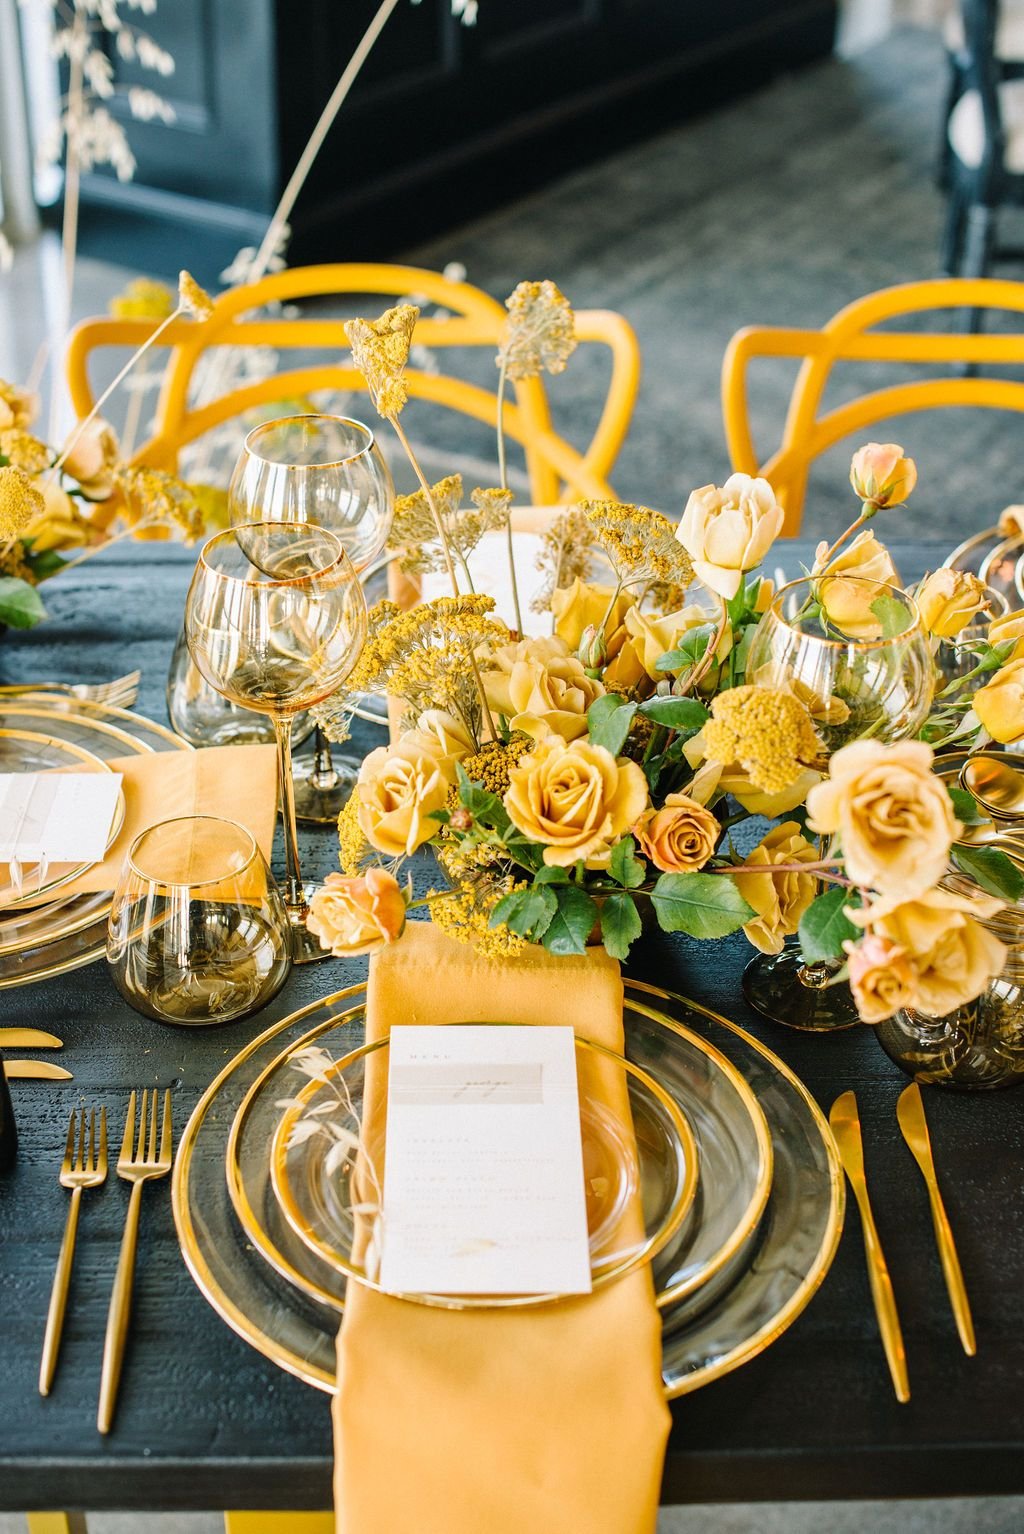 Retro Tablescape_ Yellow Roses and Yarow.jpg